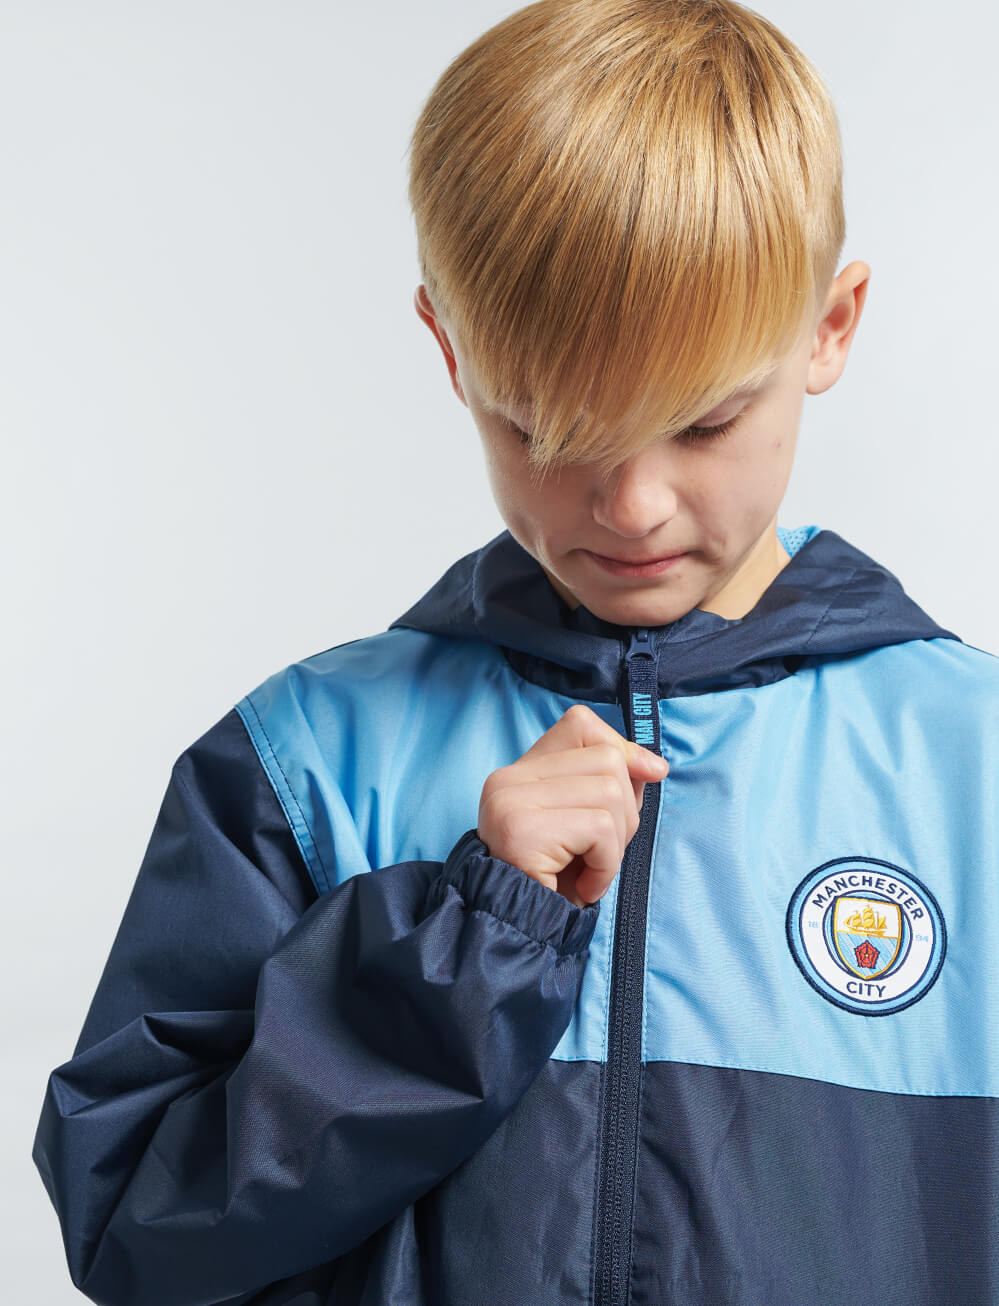 Official Manchester City Kids Shower Jacket - Navy - The World Football Store